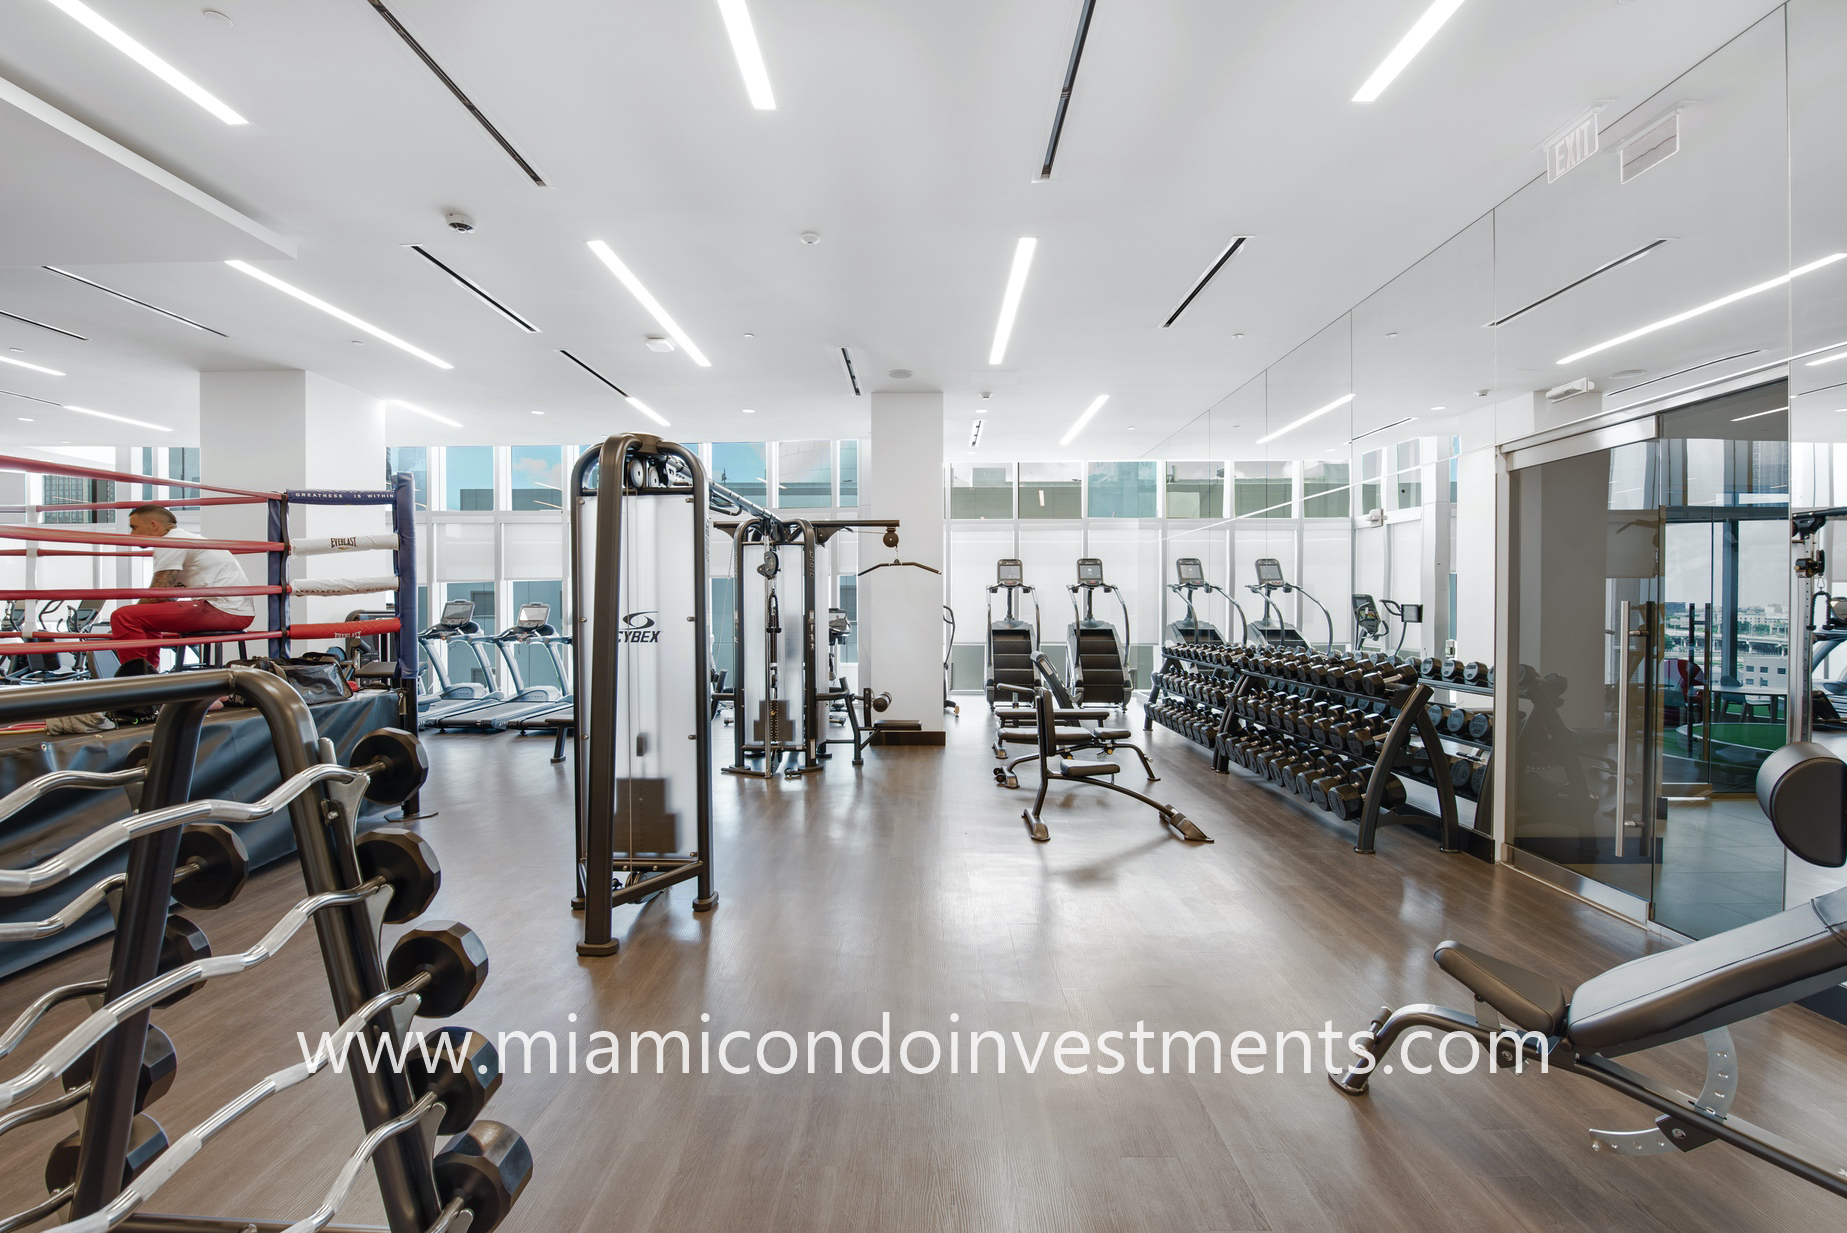 Paramount Miami fitness center and boxing ring